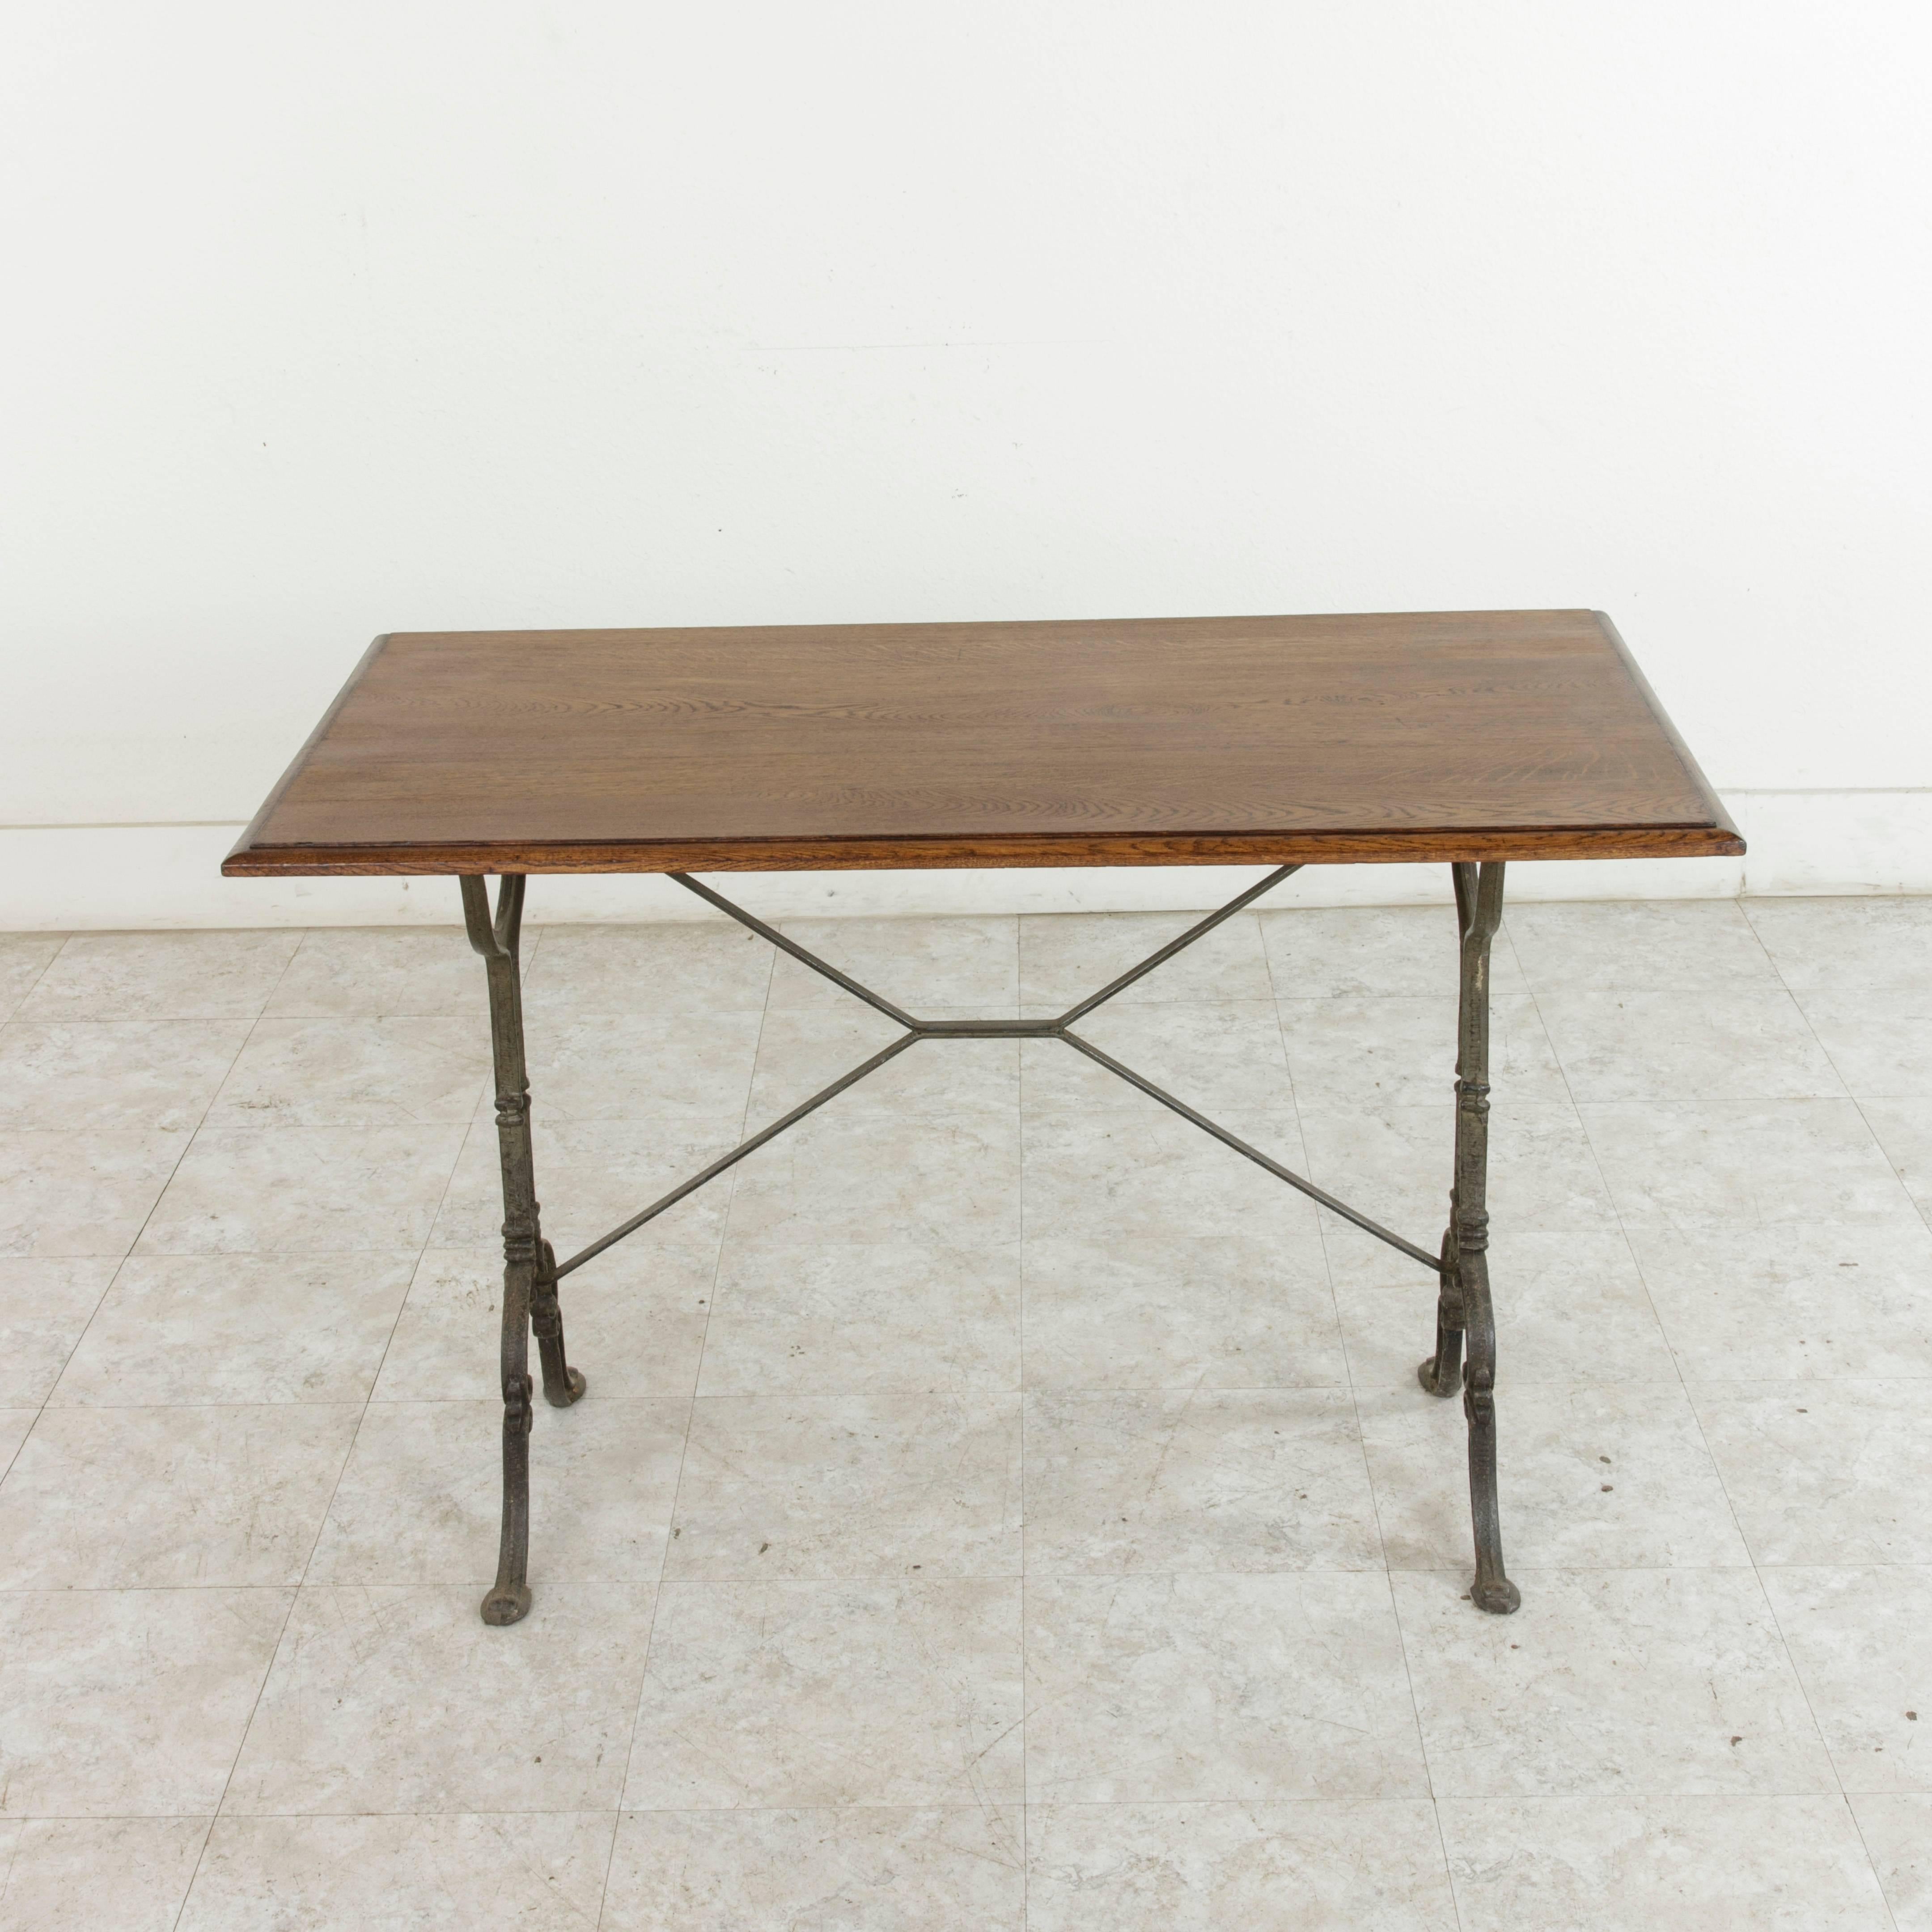 Originally used in a French brasserie in the early 20th century, this bistro table or cafe table features a cast iron base and a bevelled oak top. The classic scrolled iron legs of the piece are joined by an X-stretcher that provides additional